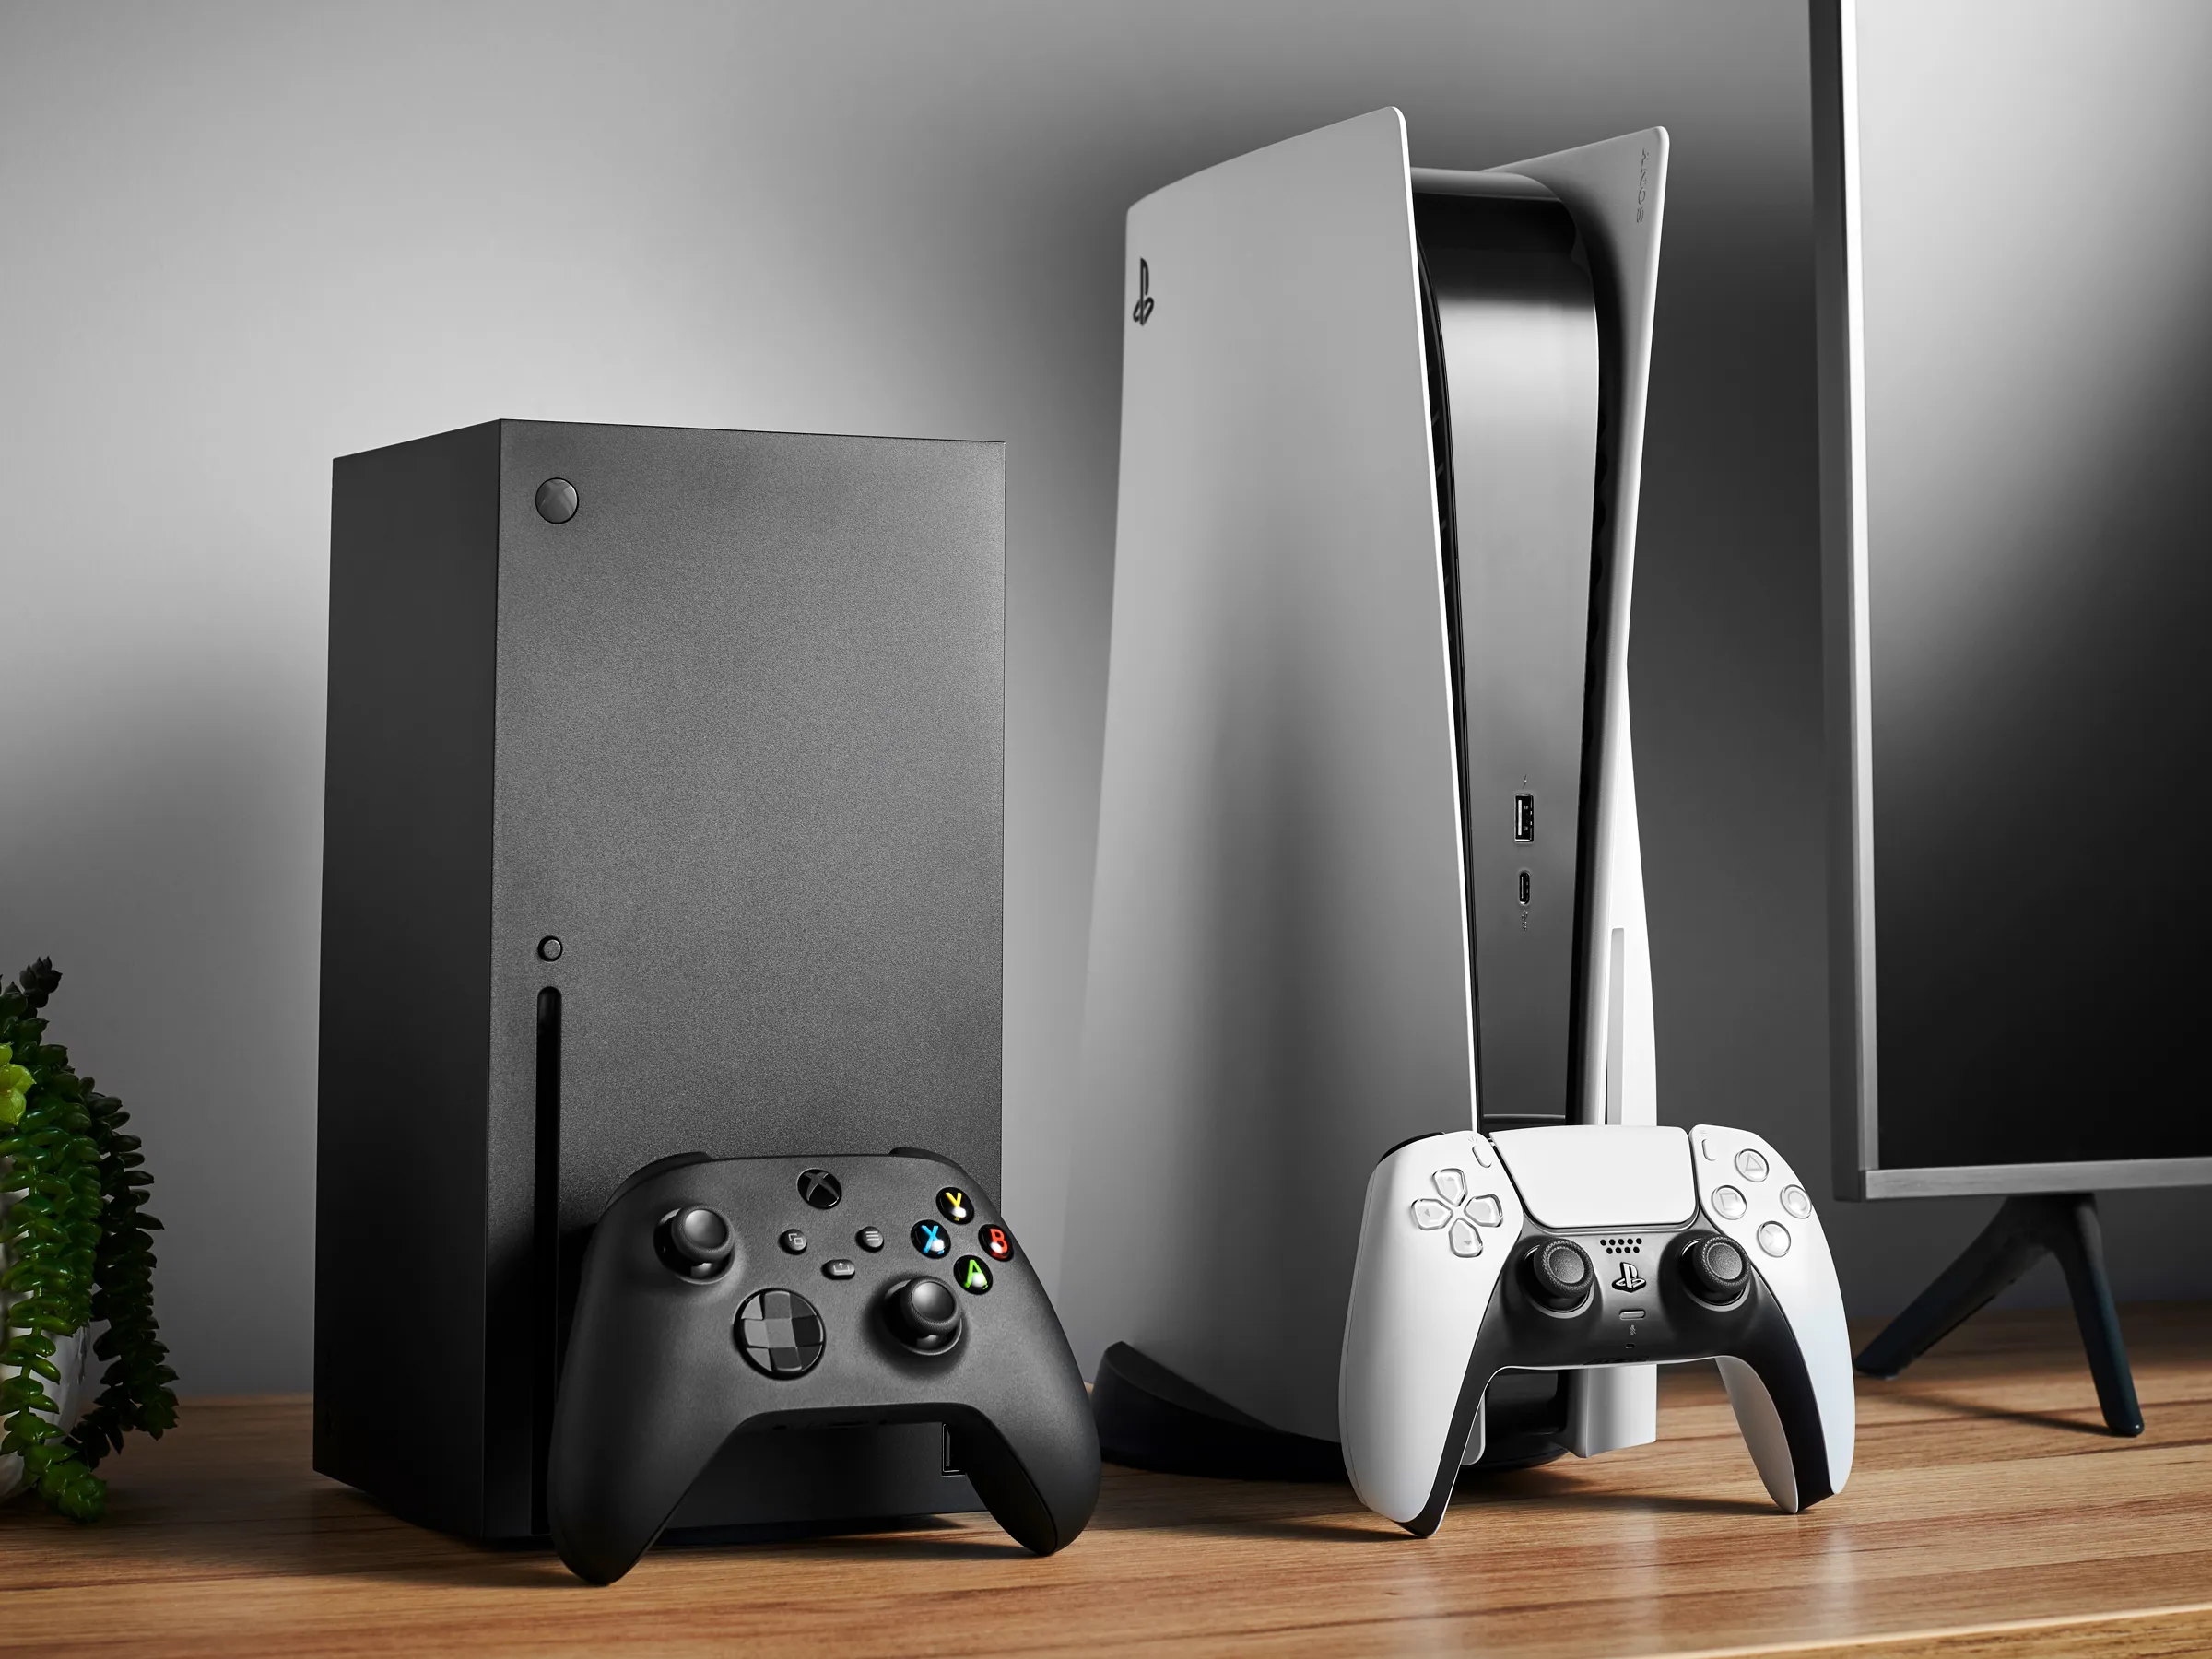 Is Microsoft Eliminating Xbox Console This Year?